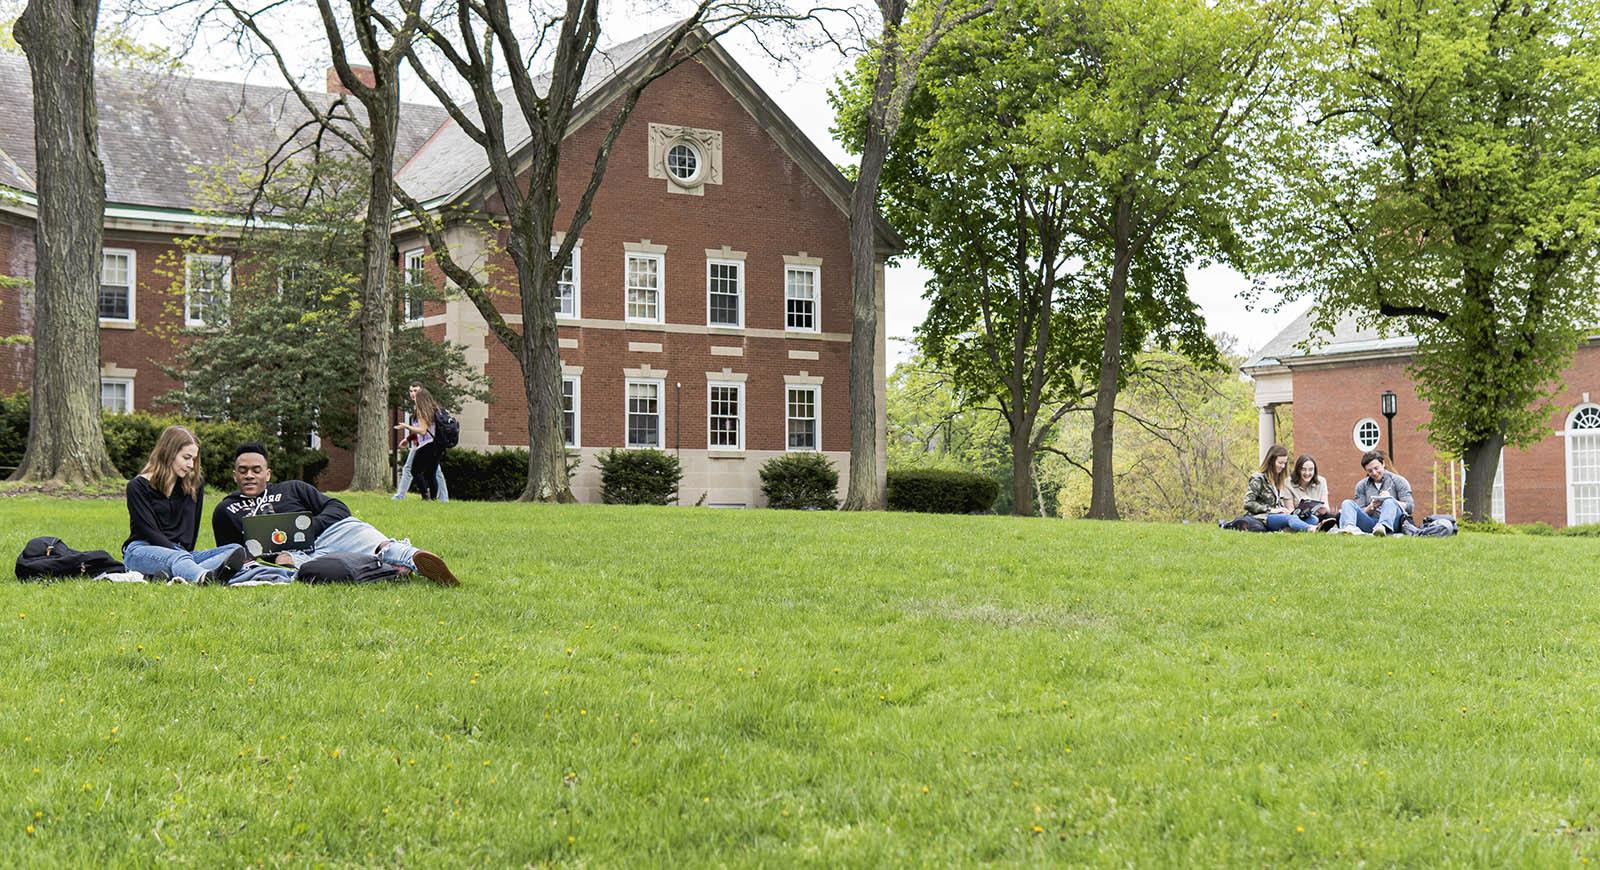 Photo of Shadyside Campus, with students studying together on the grass